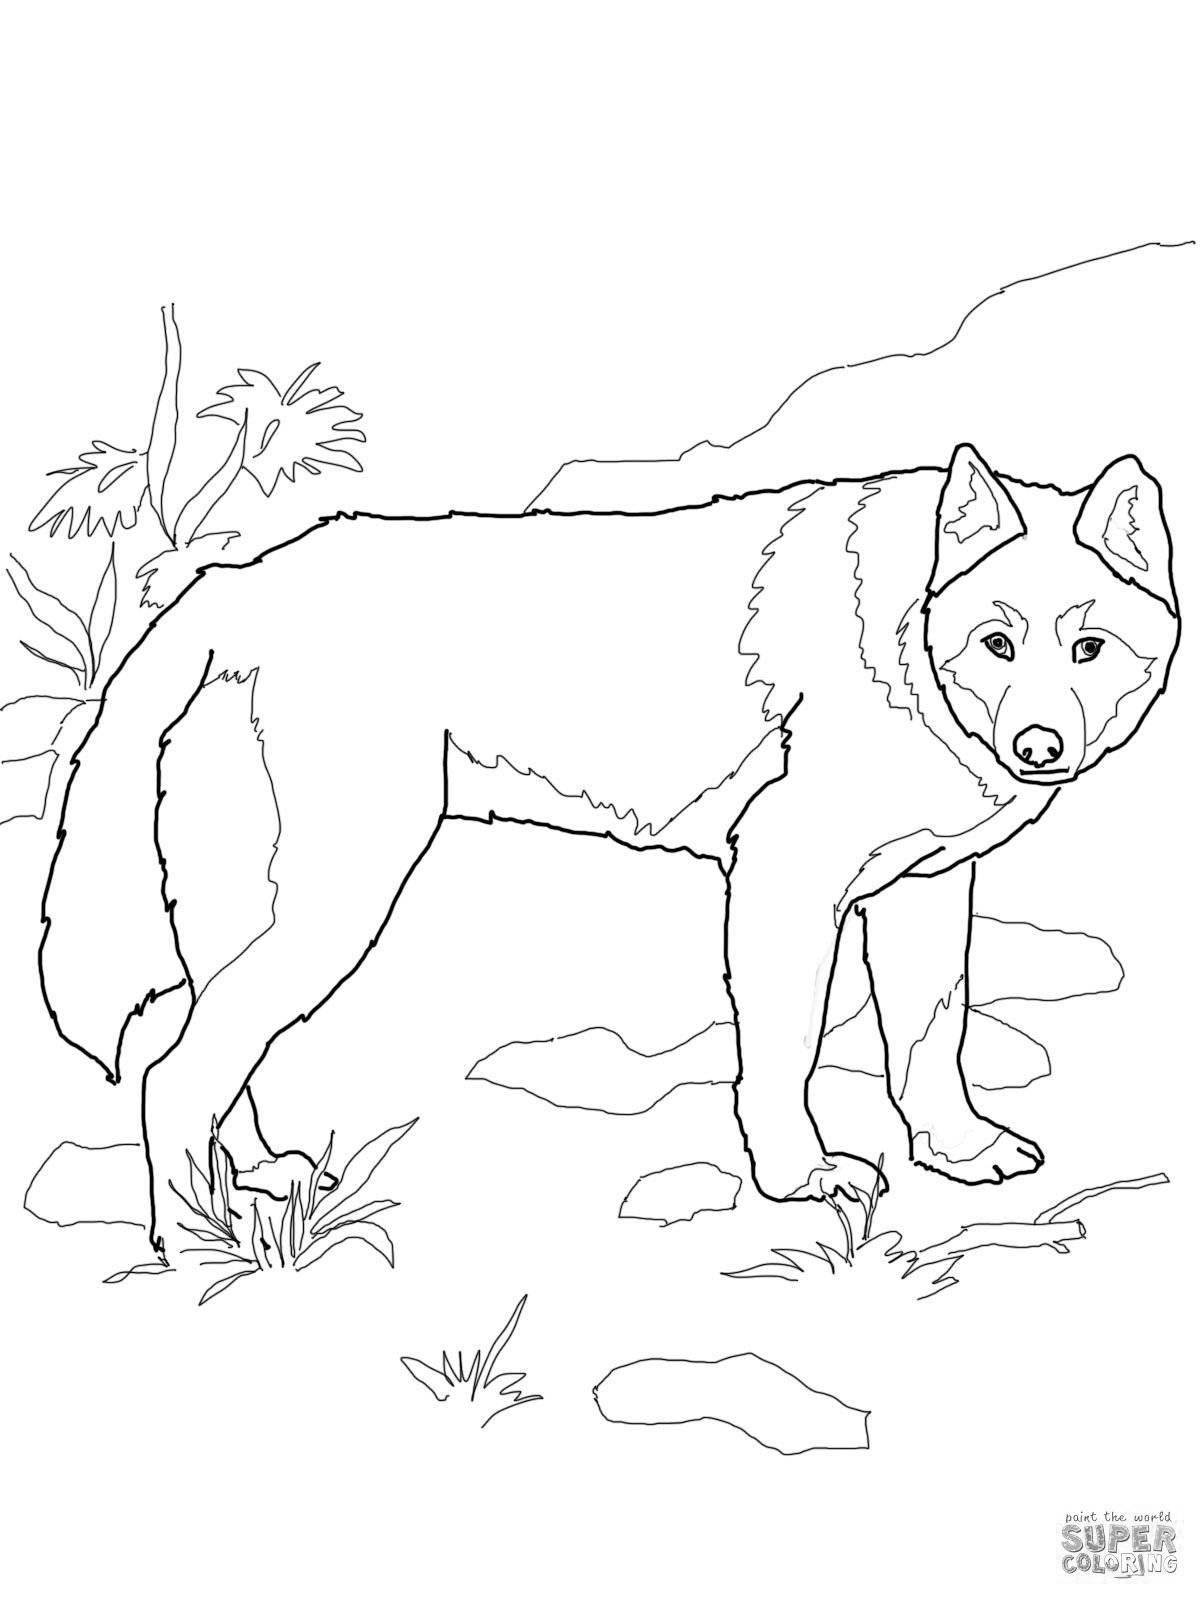 Colorful chinka coloring page